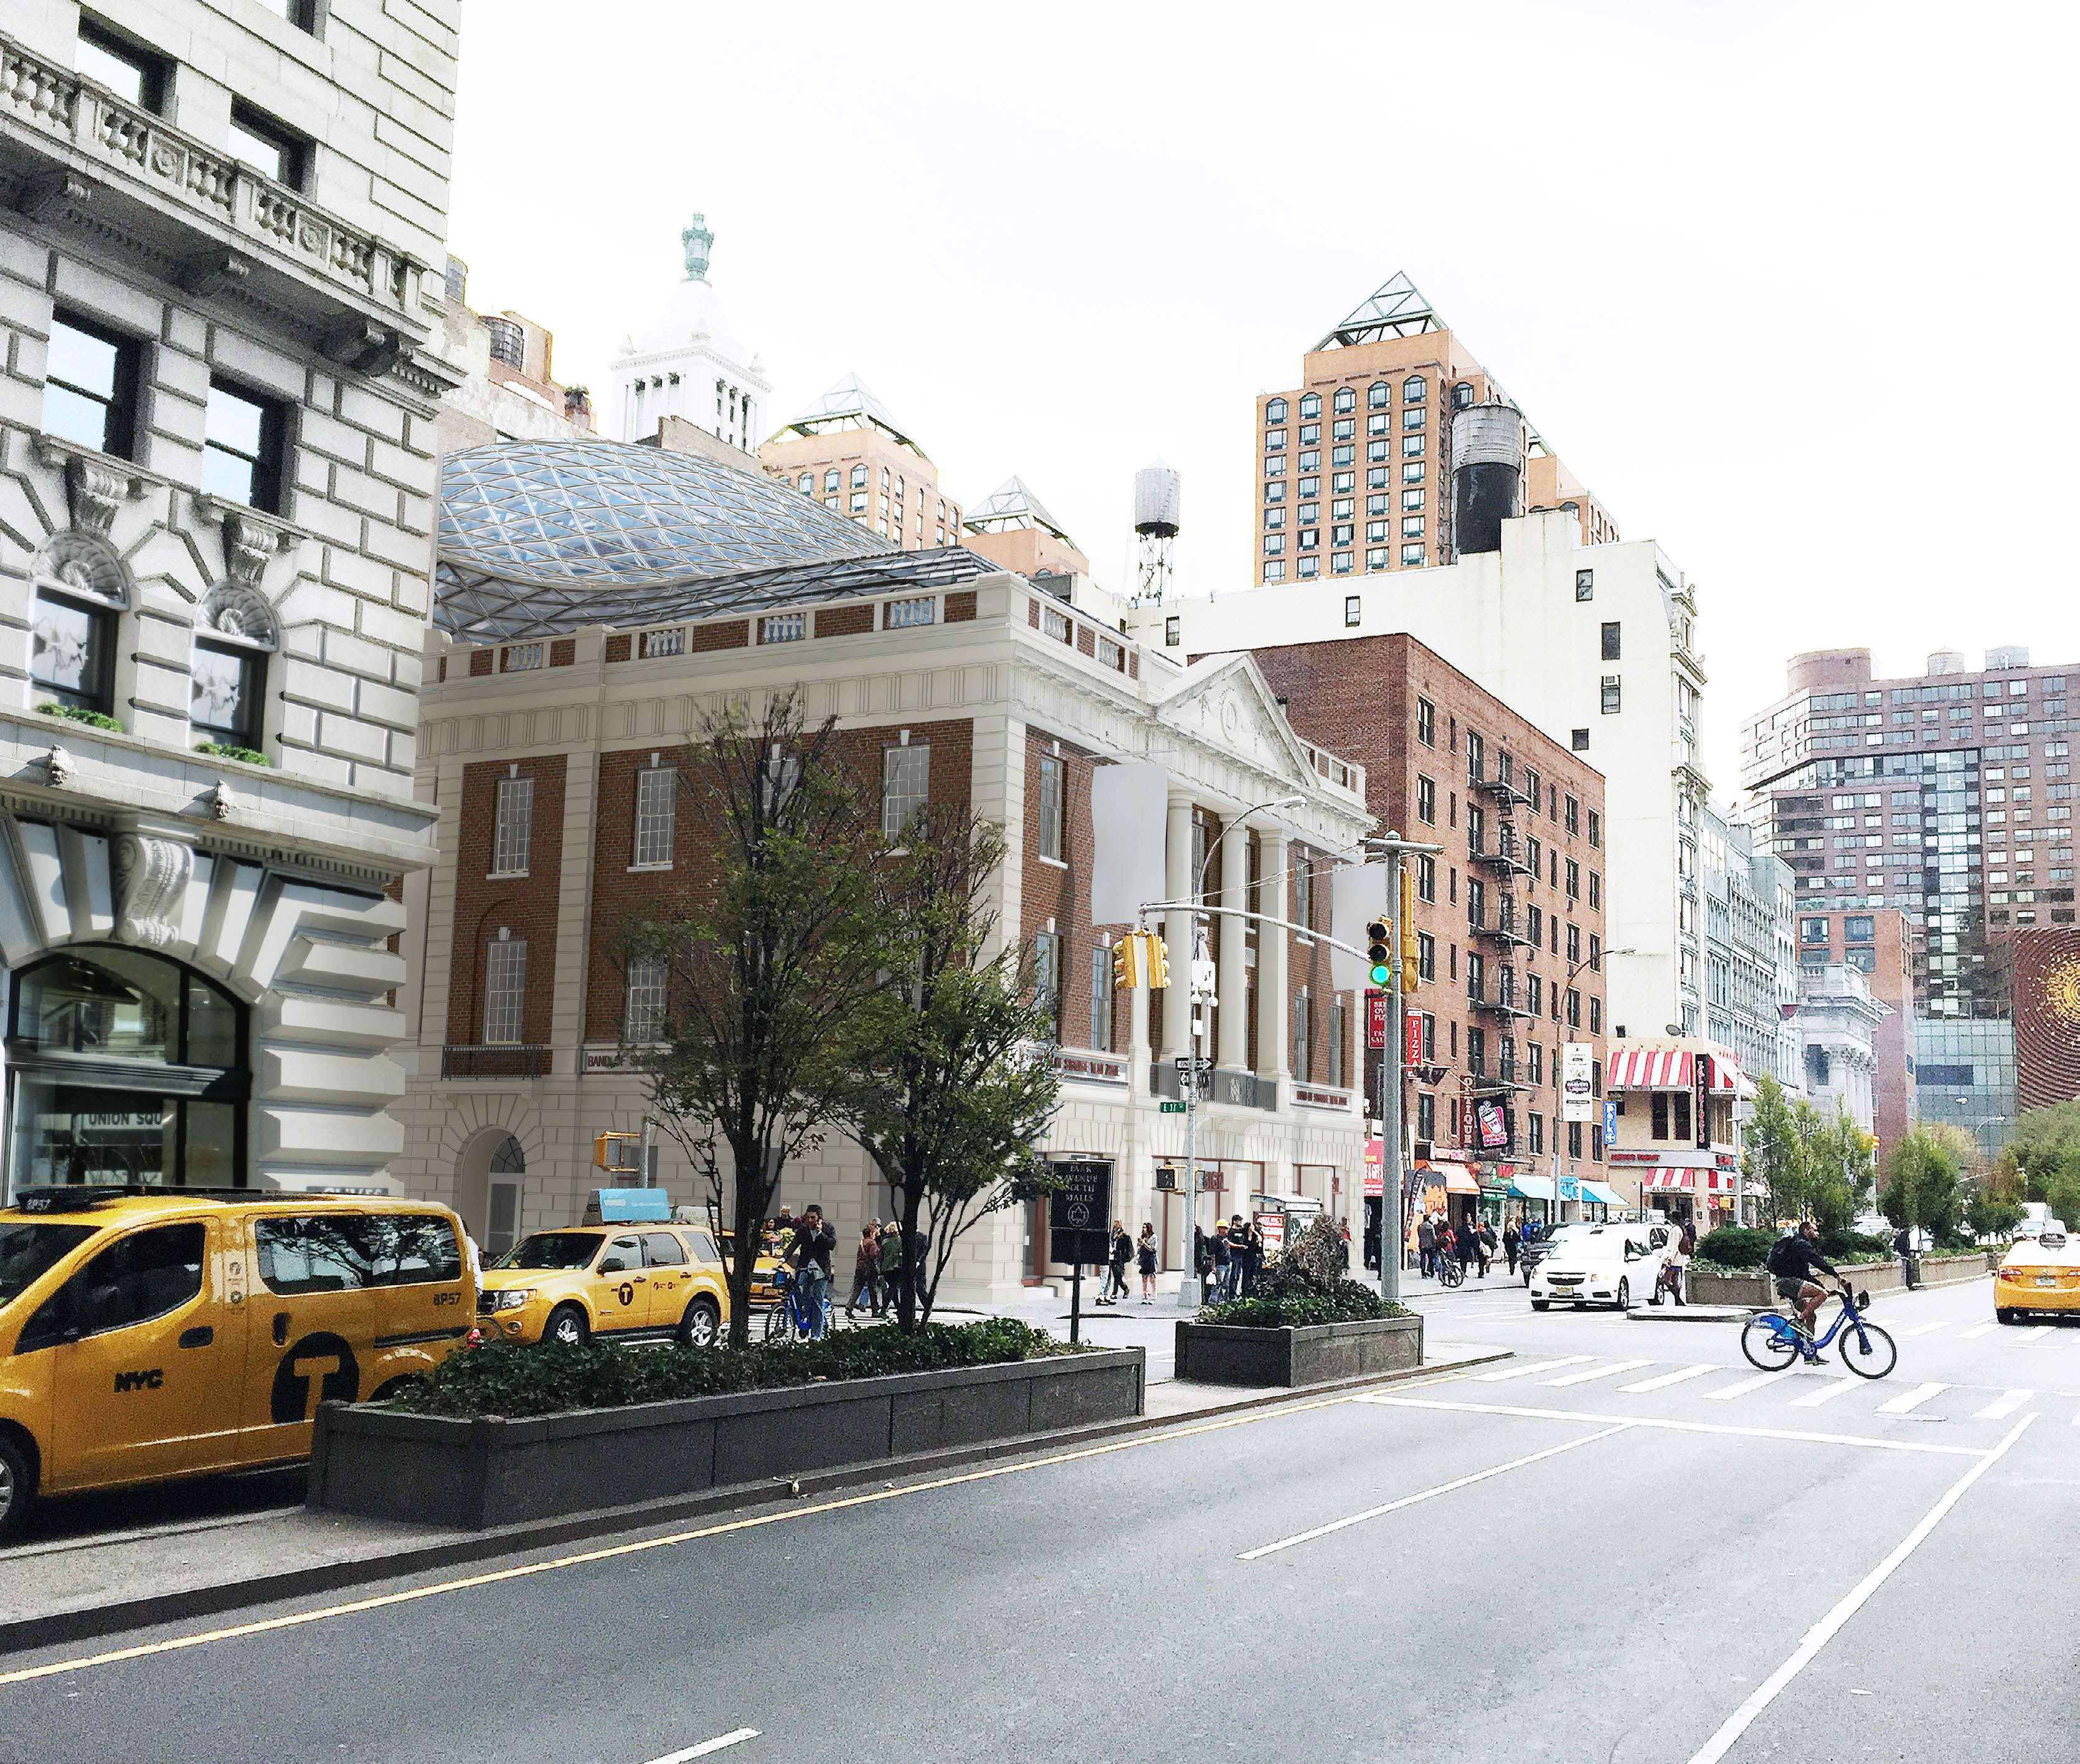 Rendering of Tammany Hall as seen from Park Avenue.